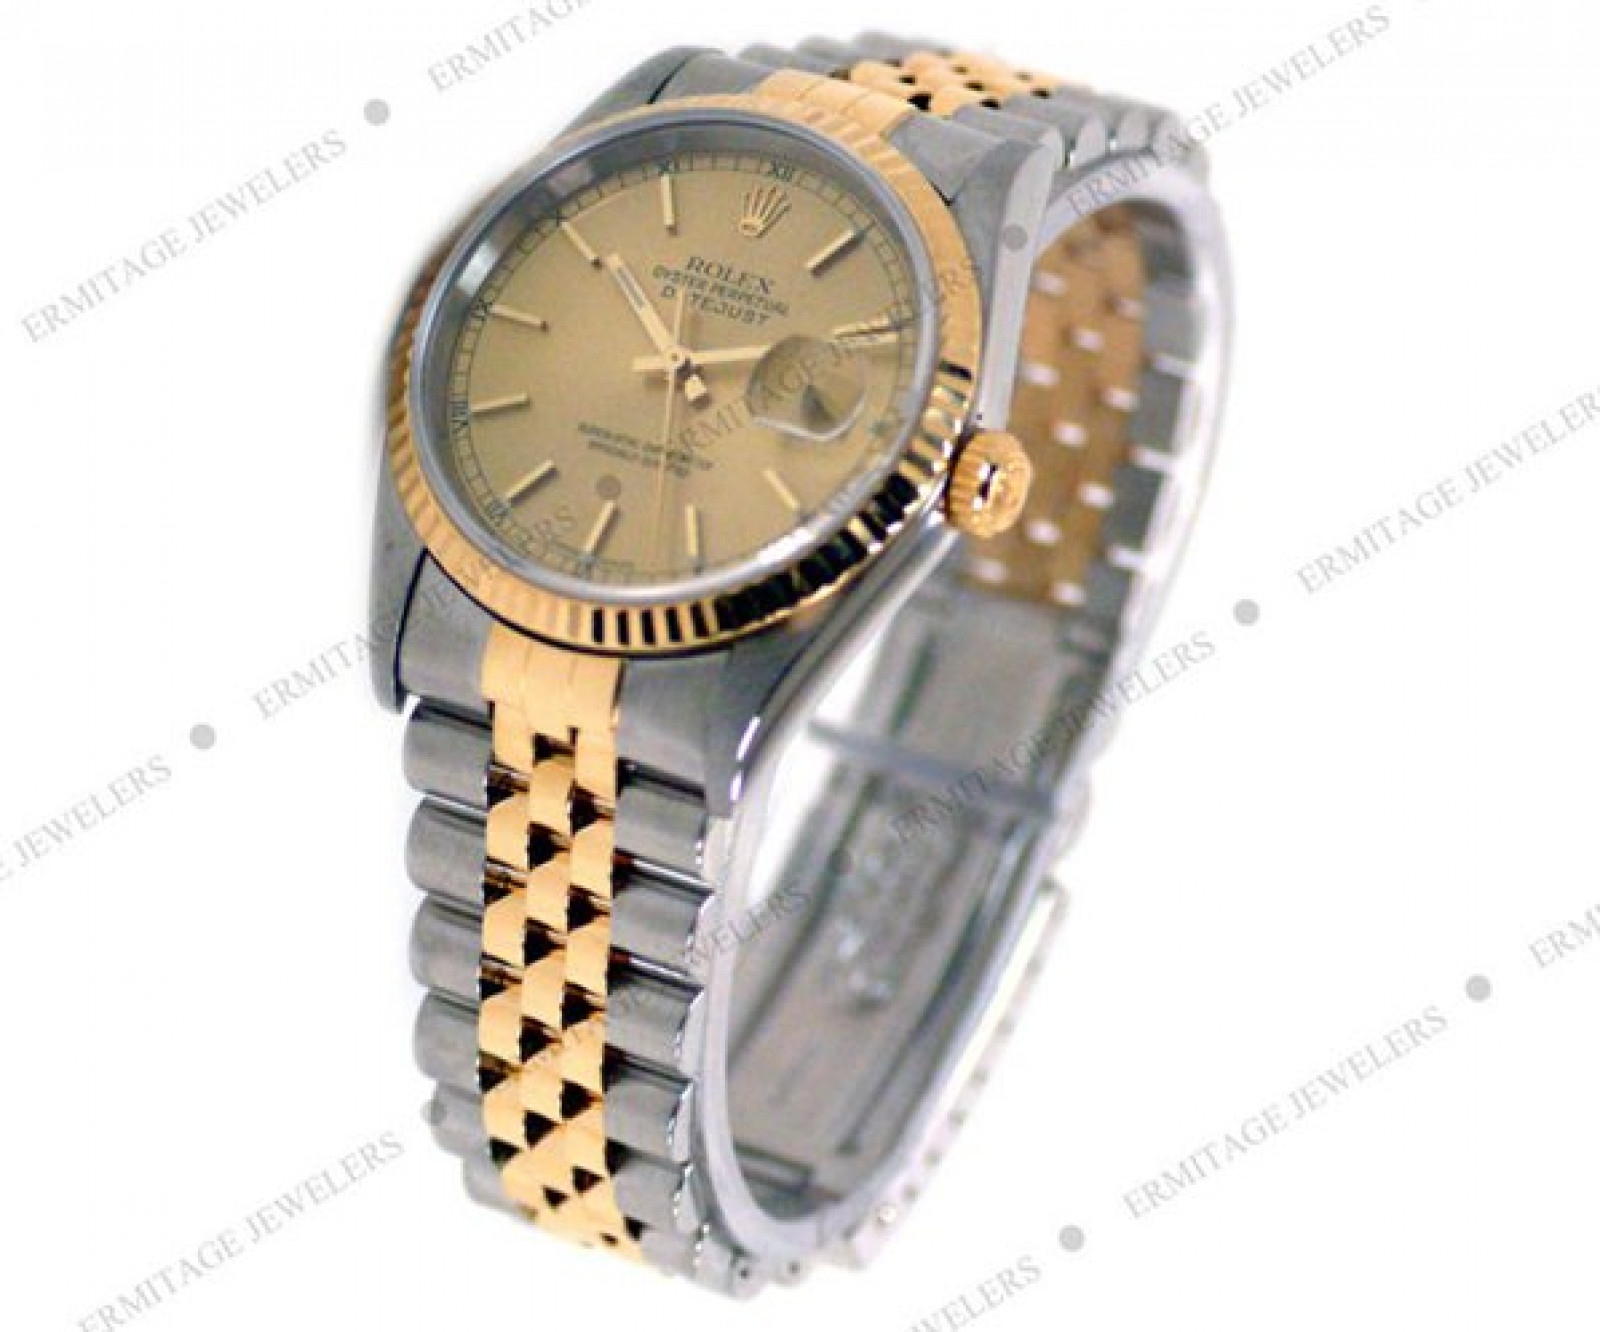 Rolex Datejust 16233 Prices for Used Watches